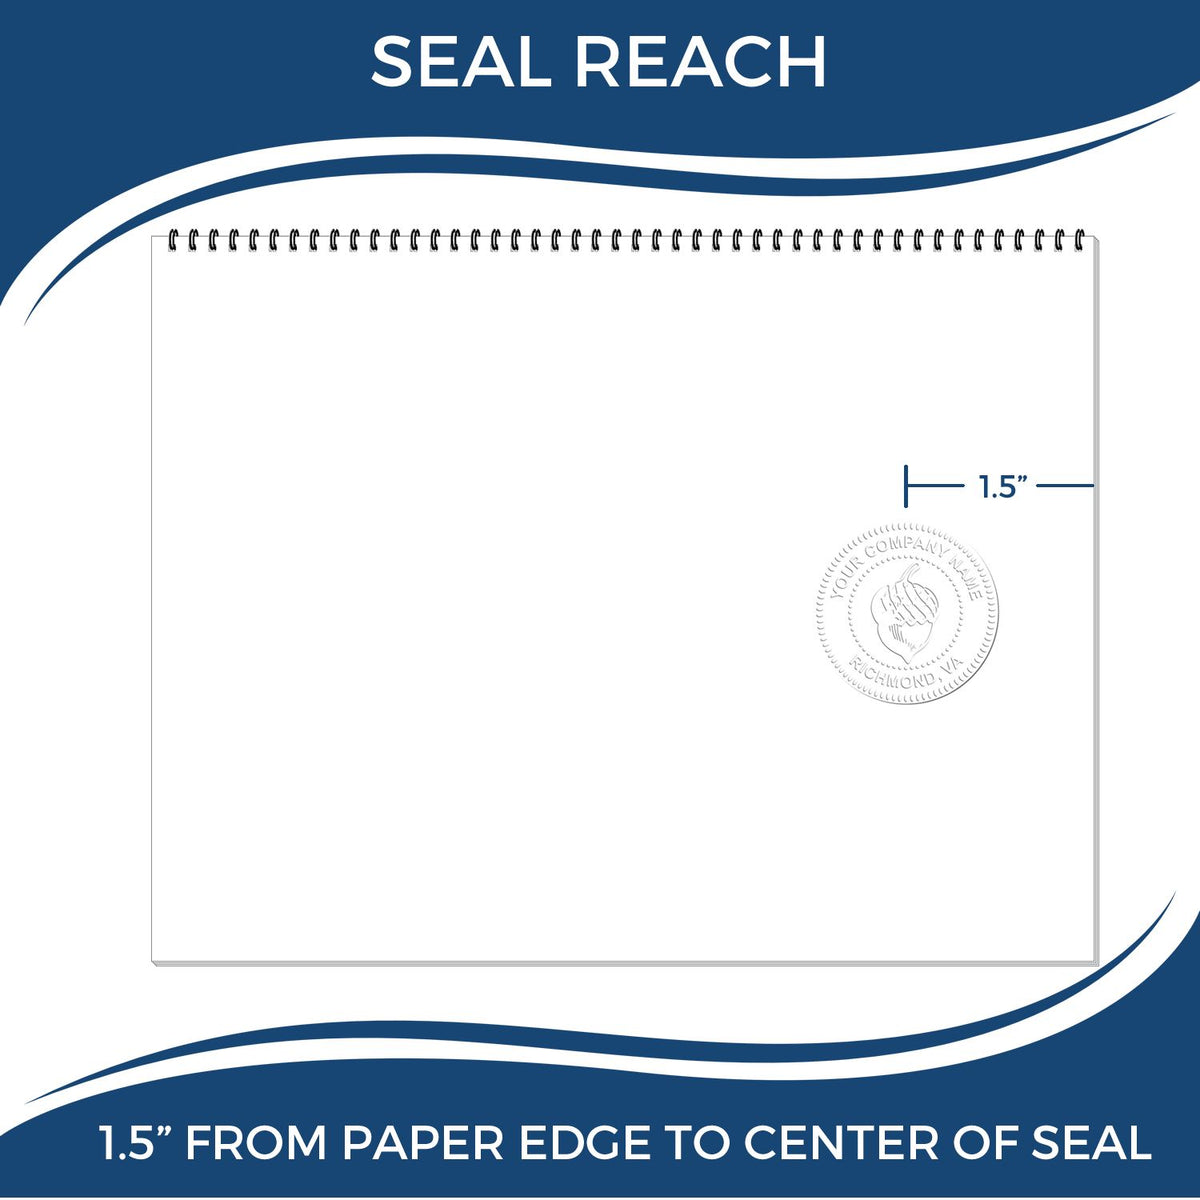 An infographic showing the seal reach which is represented by a ruler and a miniature seal image of the Handheld Maryland Architect Seal Embosser